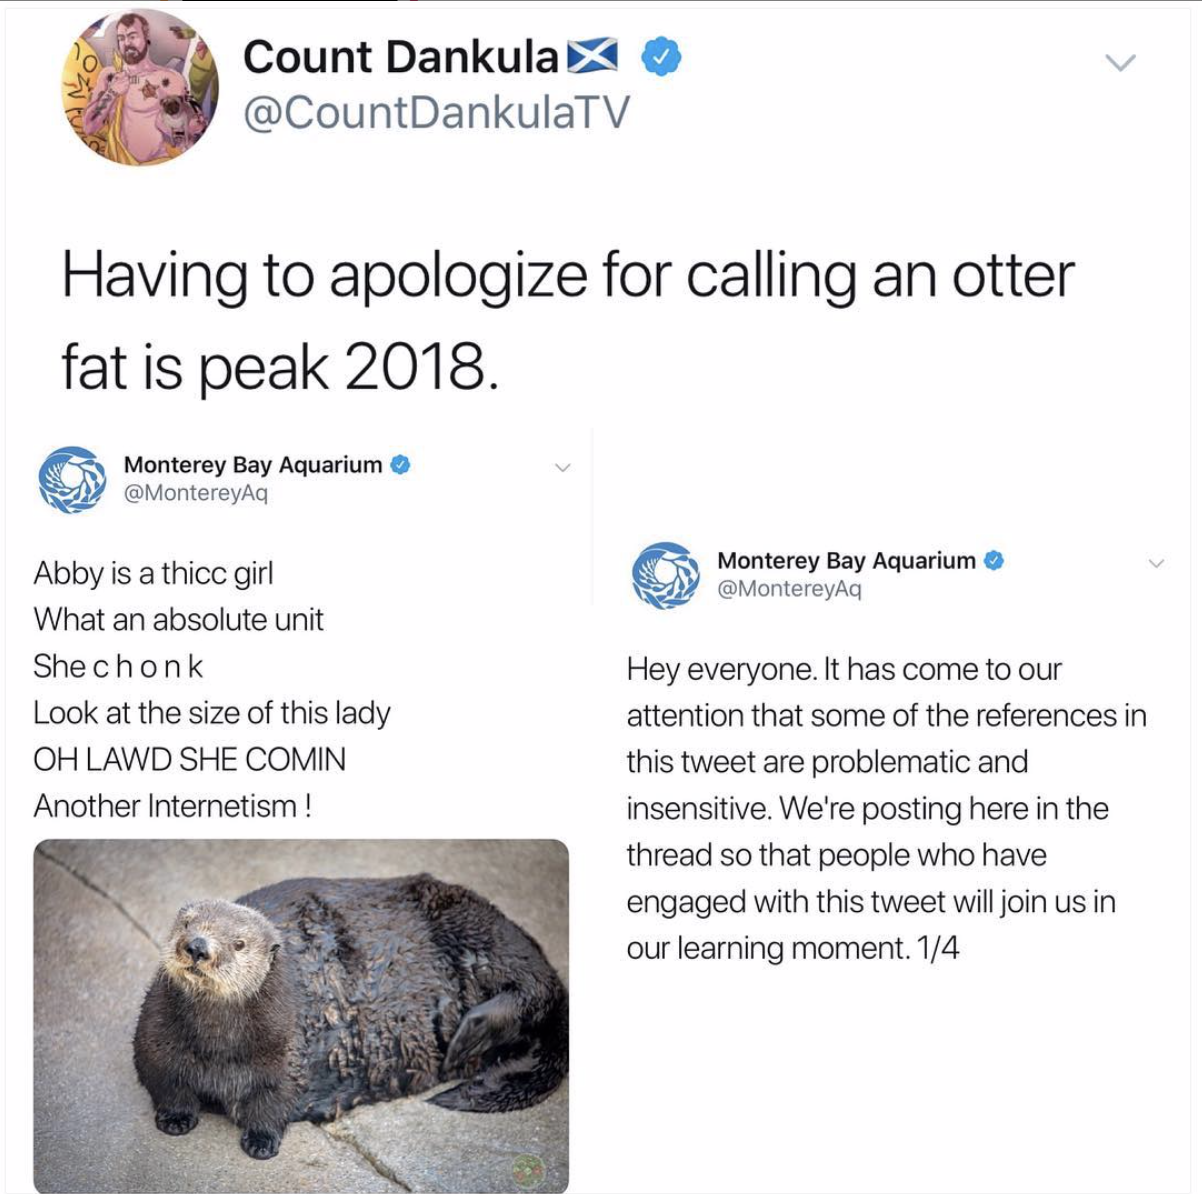 monterey bay aquarium abby - Count Dankula Having to apologize for calling an otter fat is peak 2018 Monterey Bay Aquarium Montereyag Y Monterey Bay Aquarium Monterey Abby is a thicc girl What an absolute unit Shechonk Look at the size of this lady Oh Law